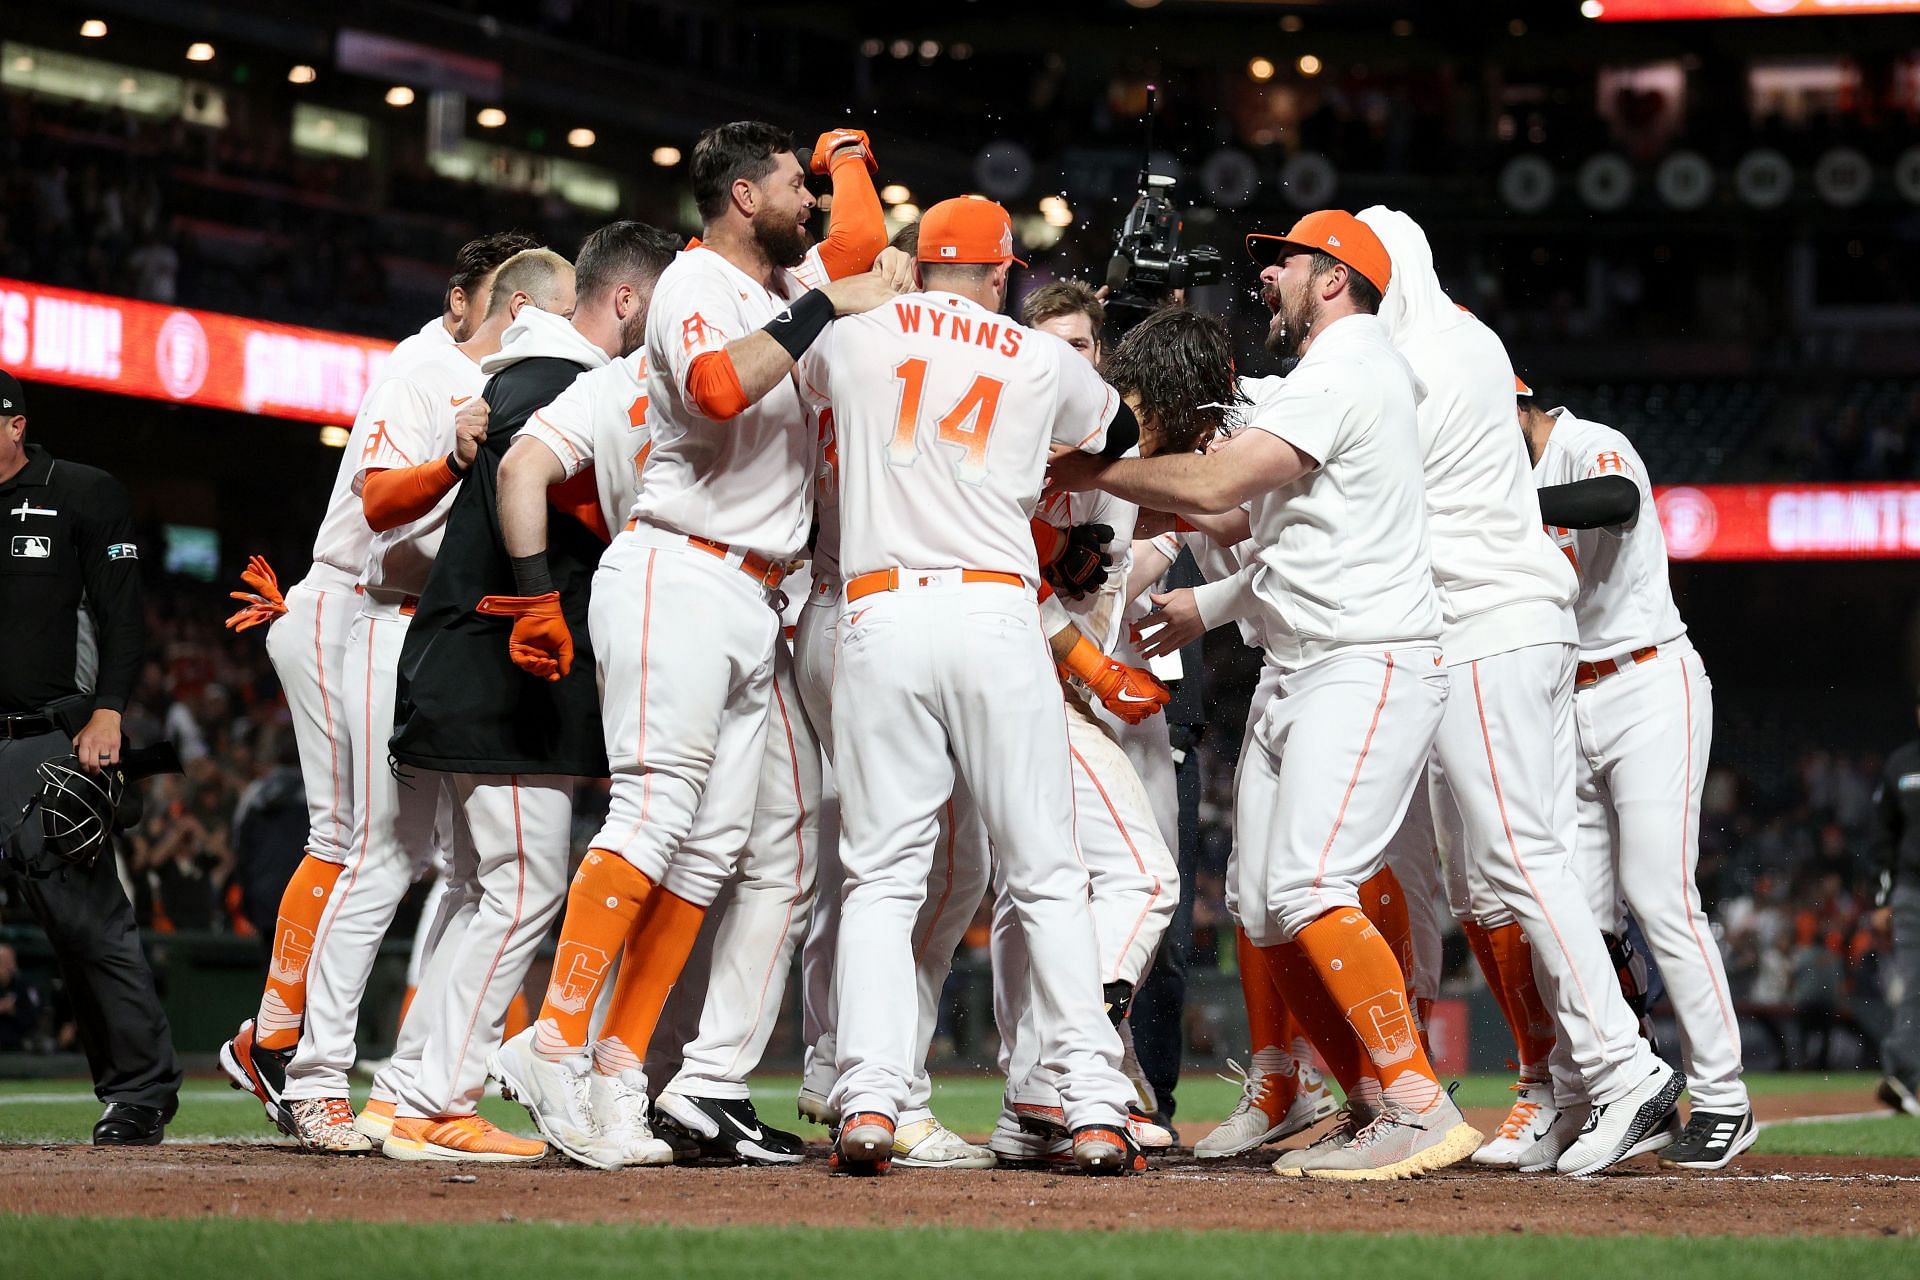 SF Giants' winning streak ends, but they're hottest ticket in town